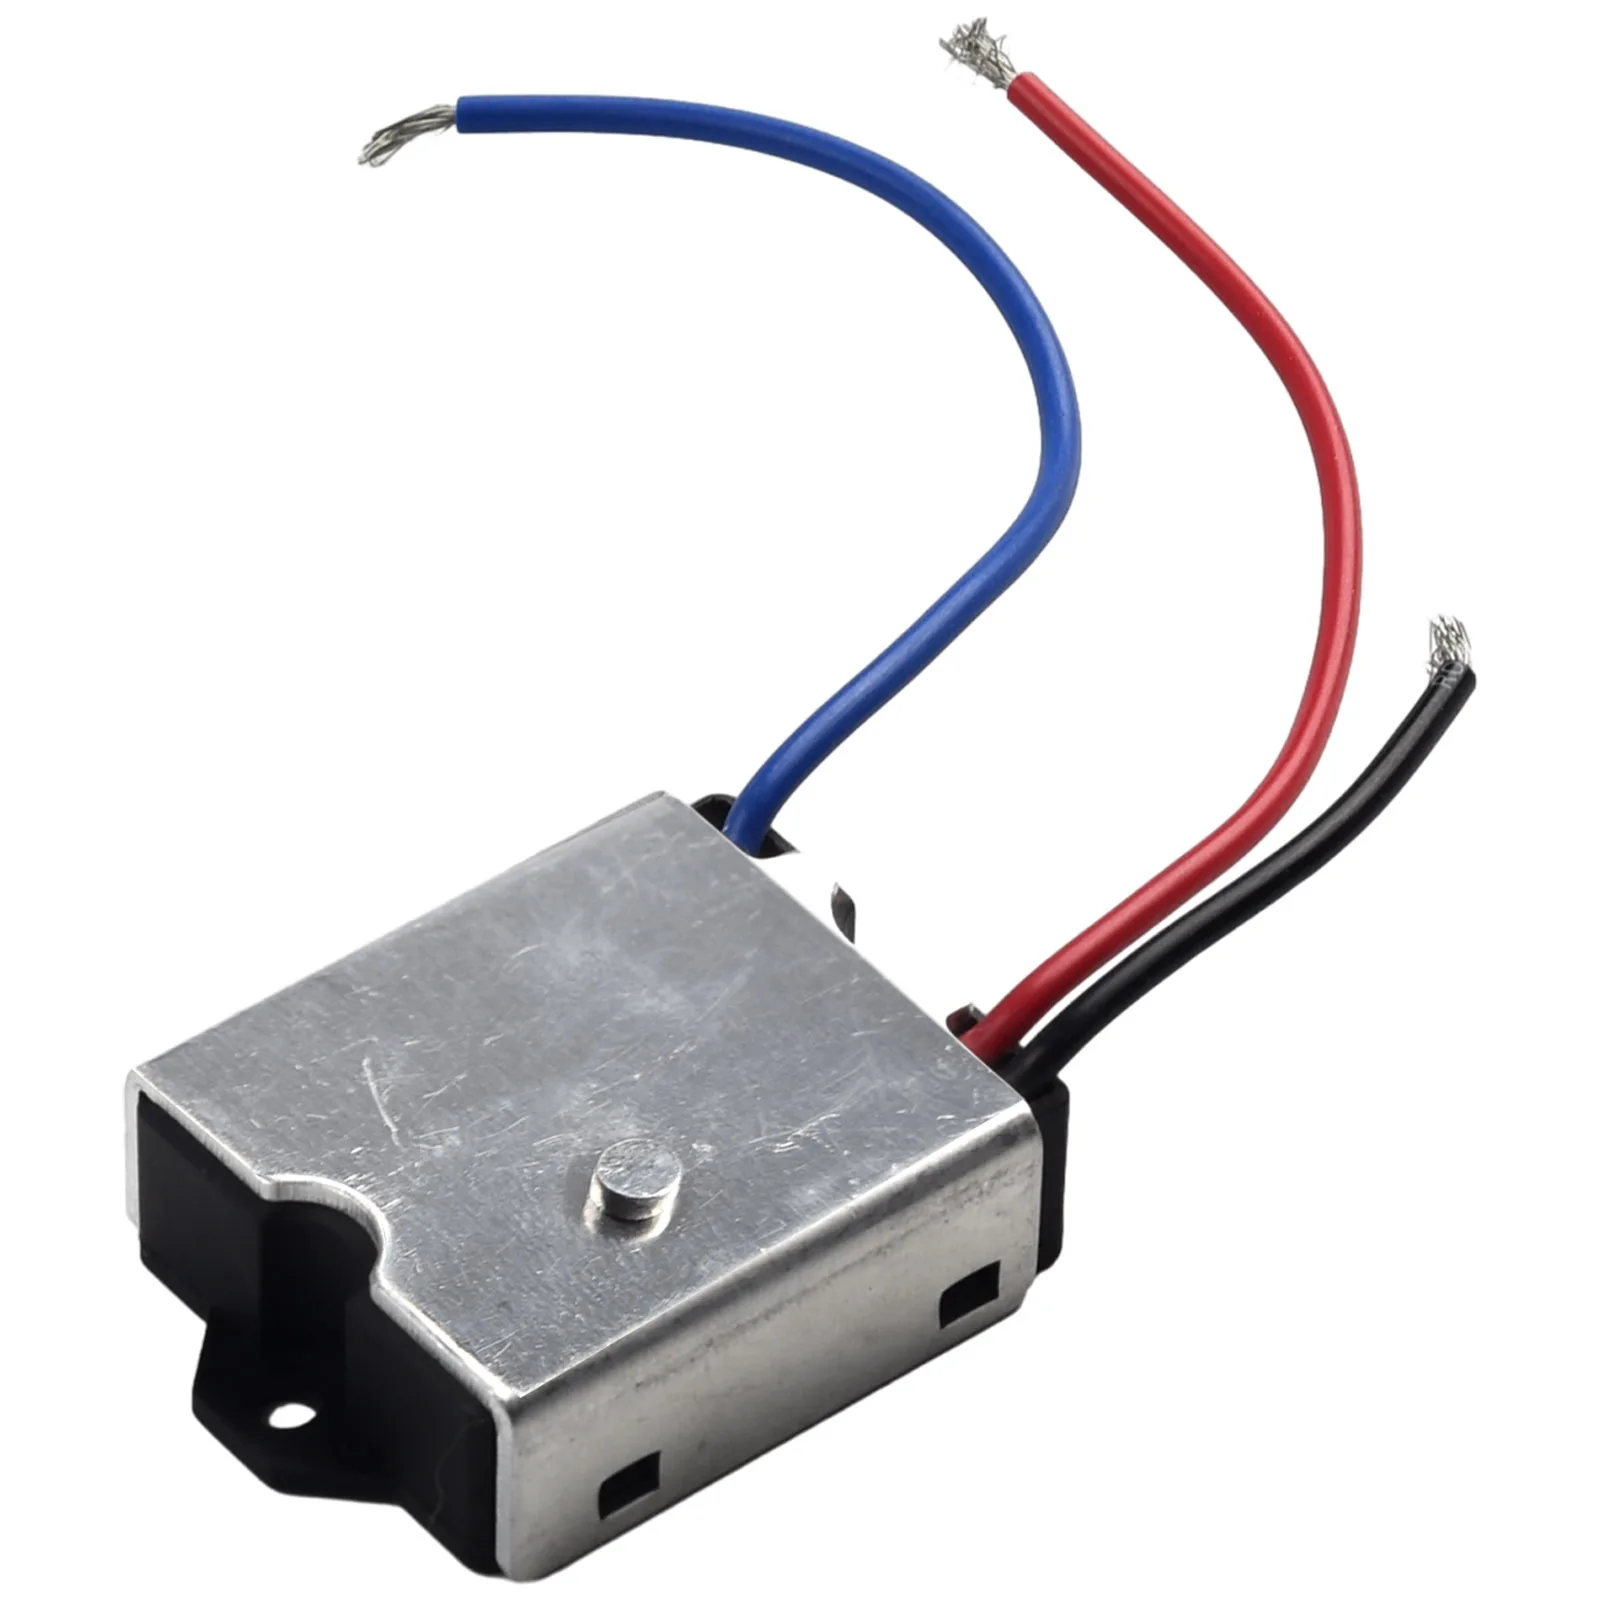 Control Switches Current Limiter For Angle Grinder Power Tools Soft Start With 3 Connecting Cables 12-20A 230V Brand New get back to work with our easy to install electric tools trigger switch replacement for 150 angle grinder order today